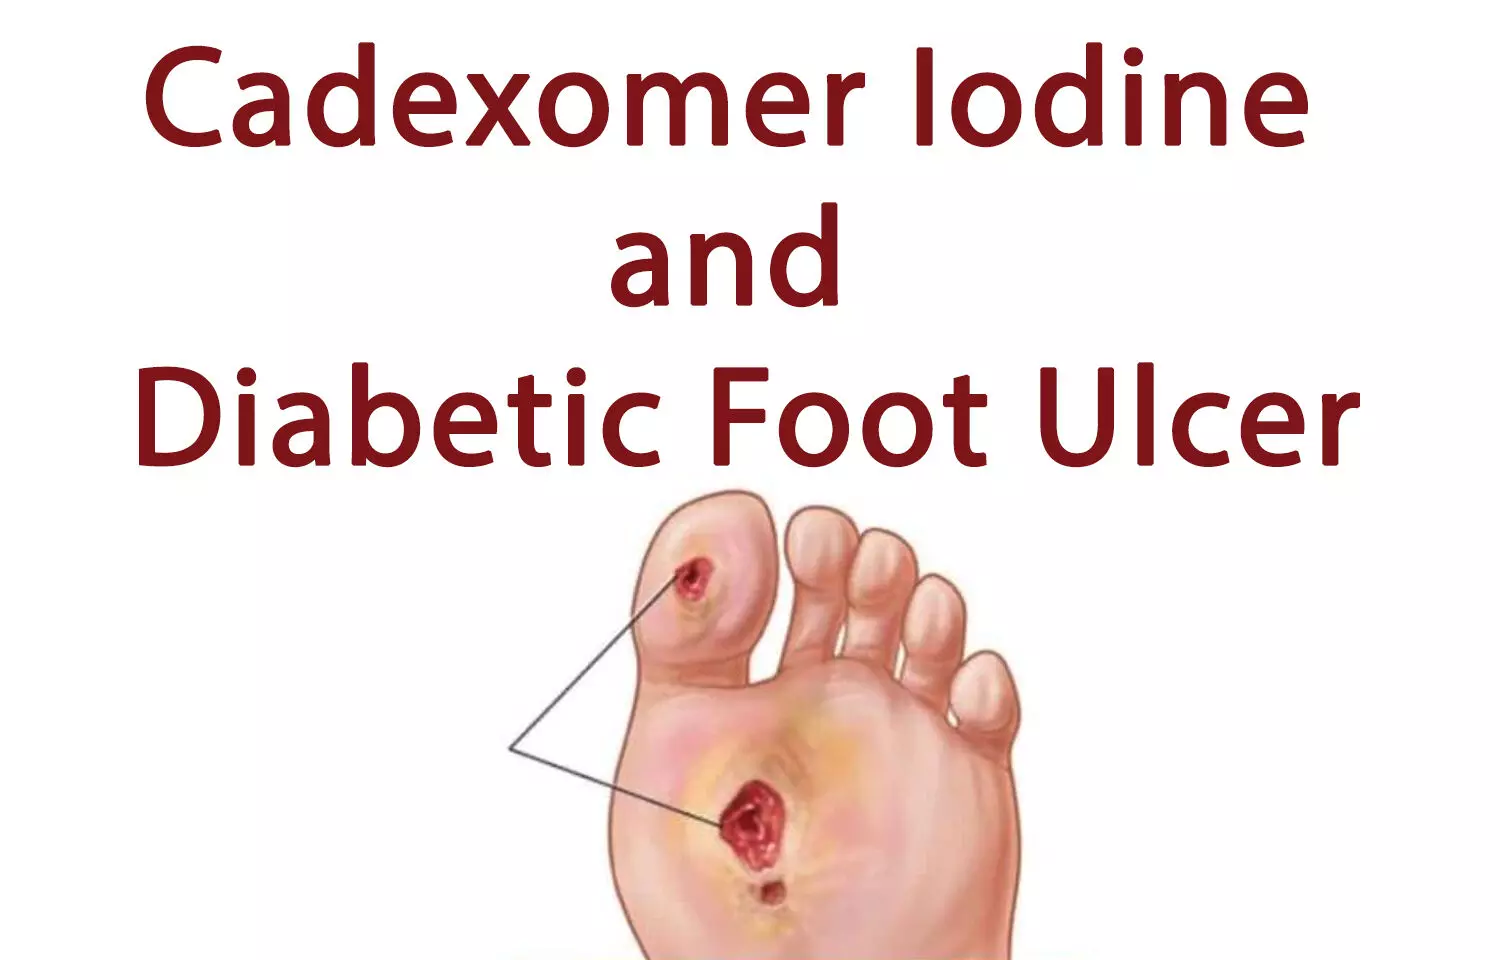 Successful treatment of diabetic foot ulcer during COVID-19 lockdown using Cadexomer Iodine: Case report